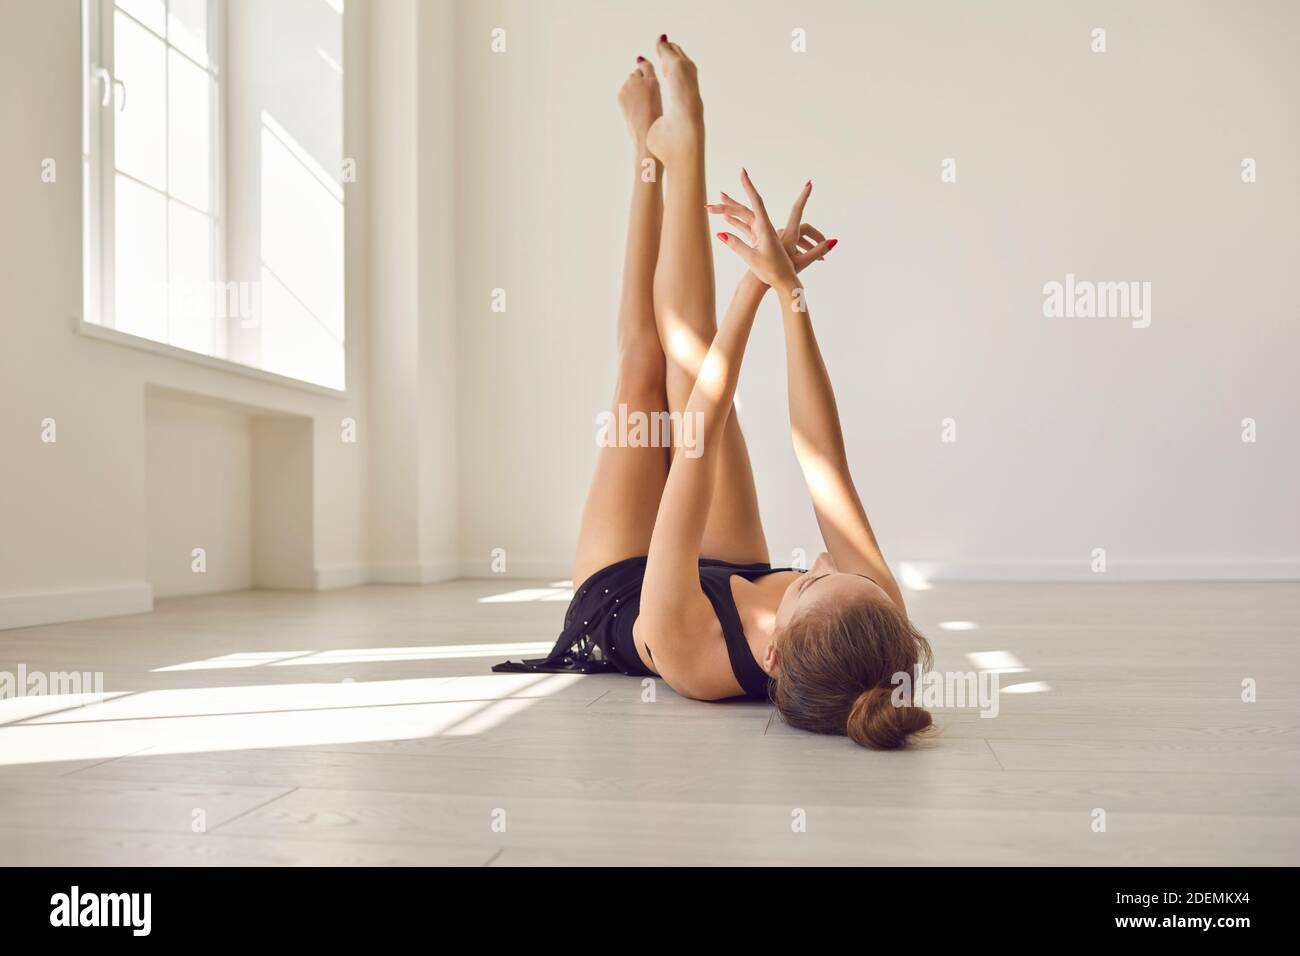 Slender female practicing rhythmic gymnastics exercises or dancing in a bright studio. Stock Photo